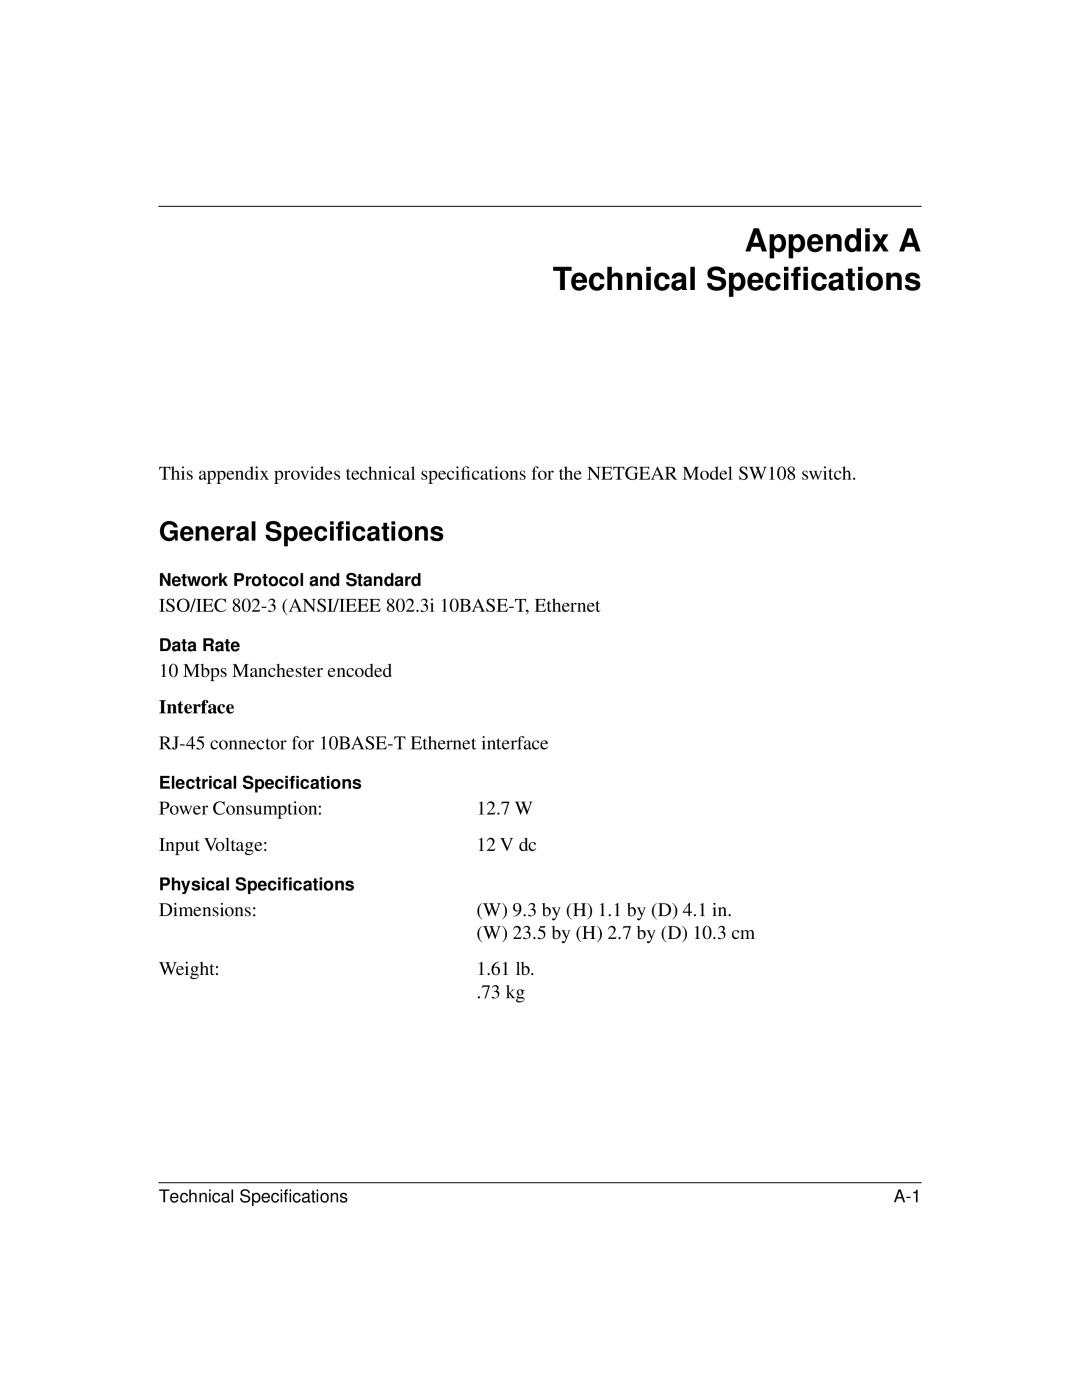 NETGEAR SW108 manual Appendix a Technical Speciﬁcations, General Speciﬁcations 